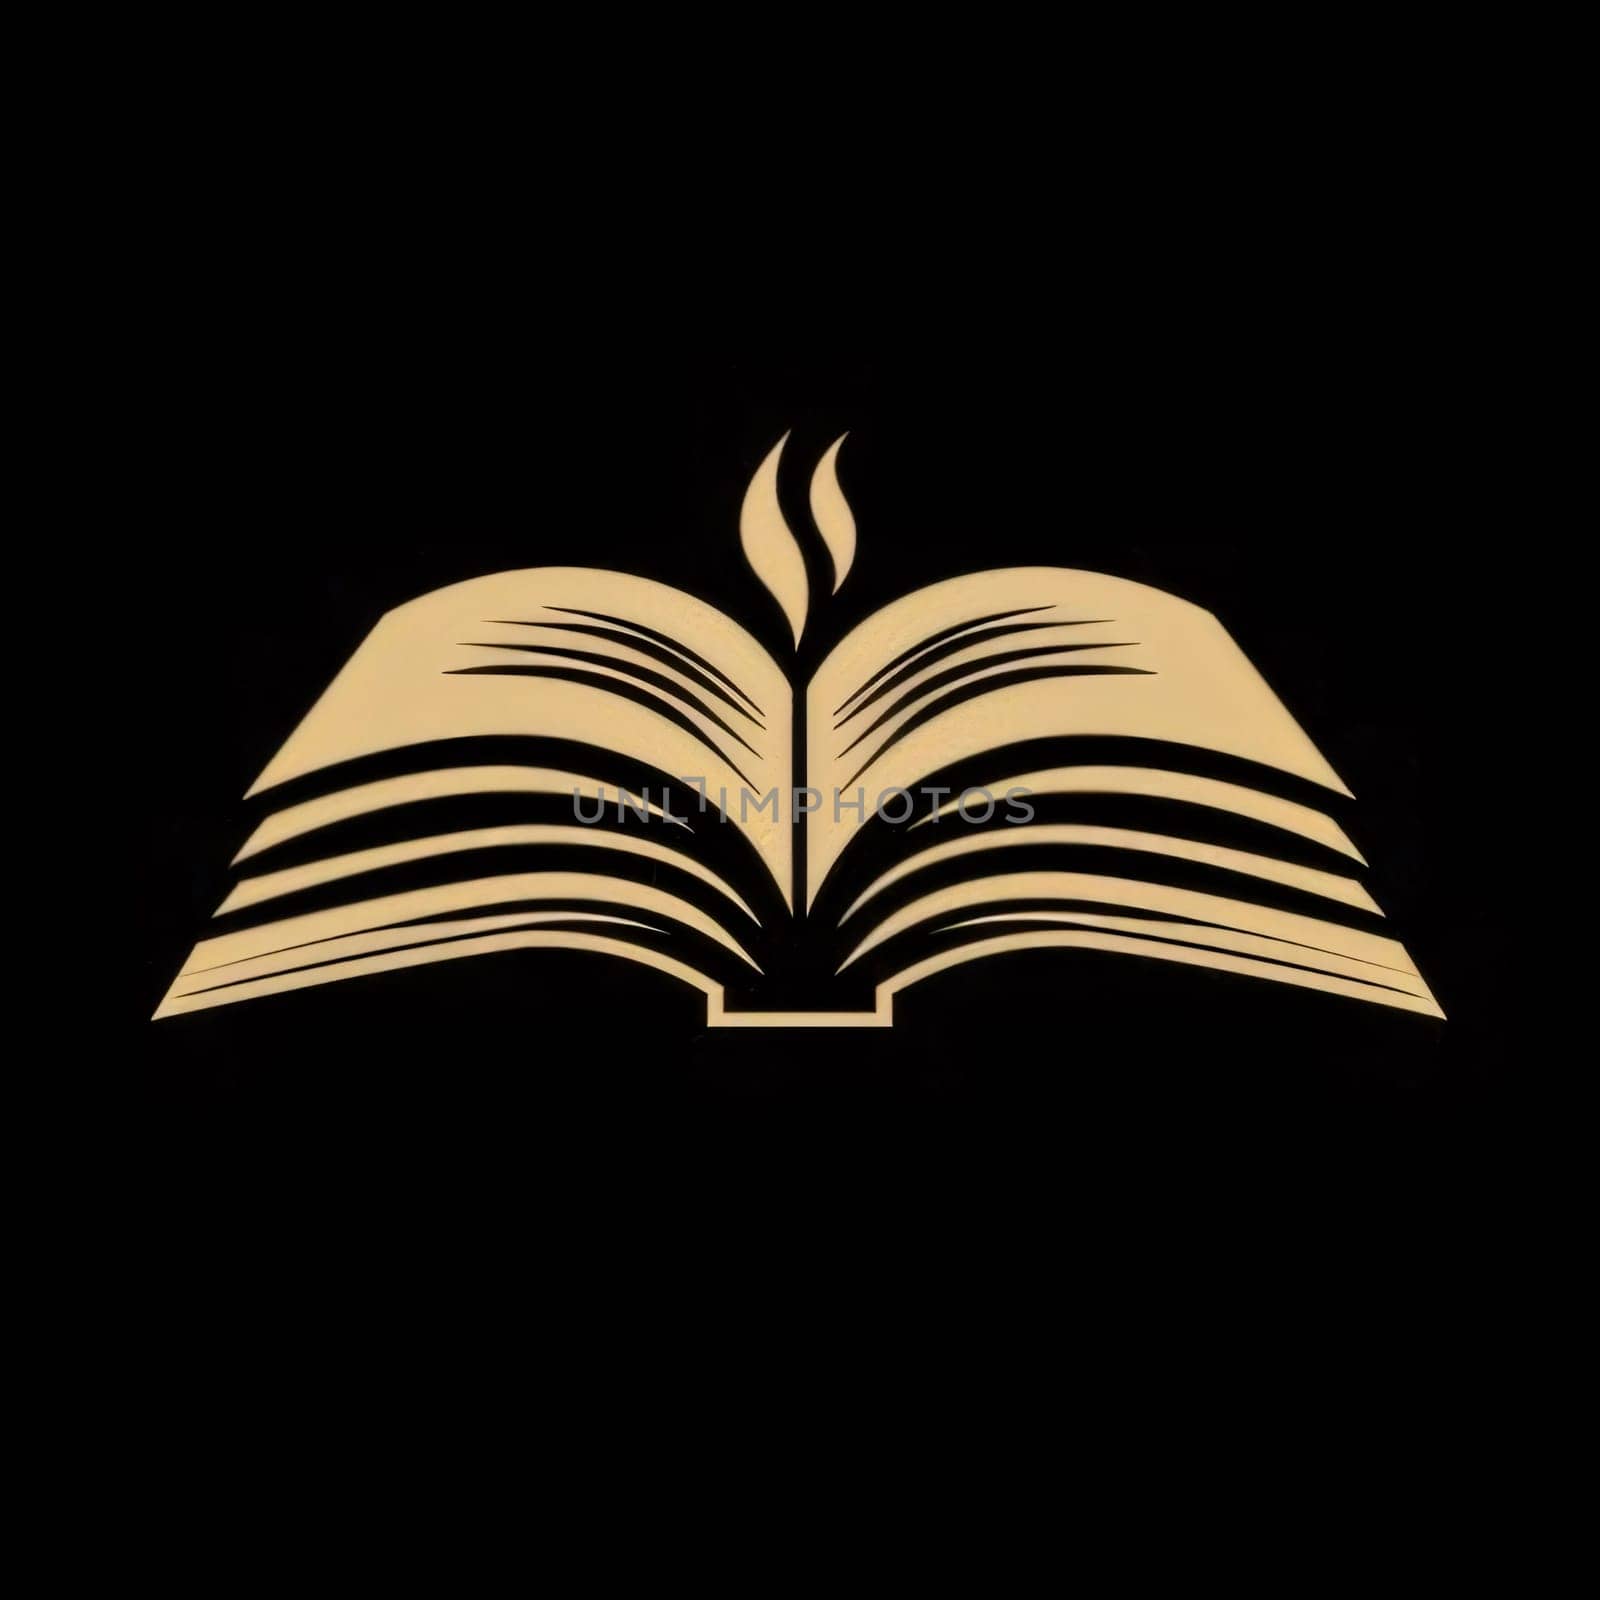 World Book Day: Open book icon on black background. Vector illustration. Eps 10.